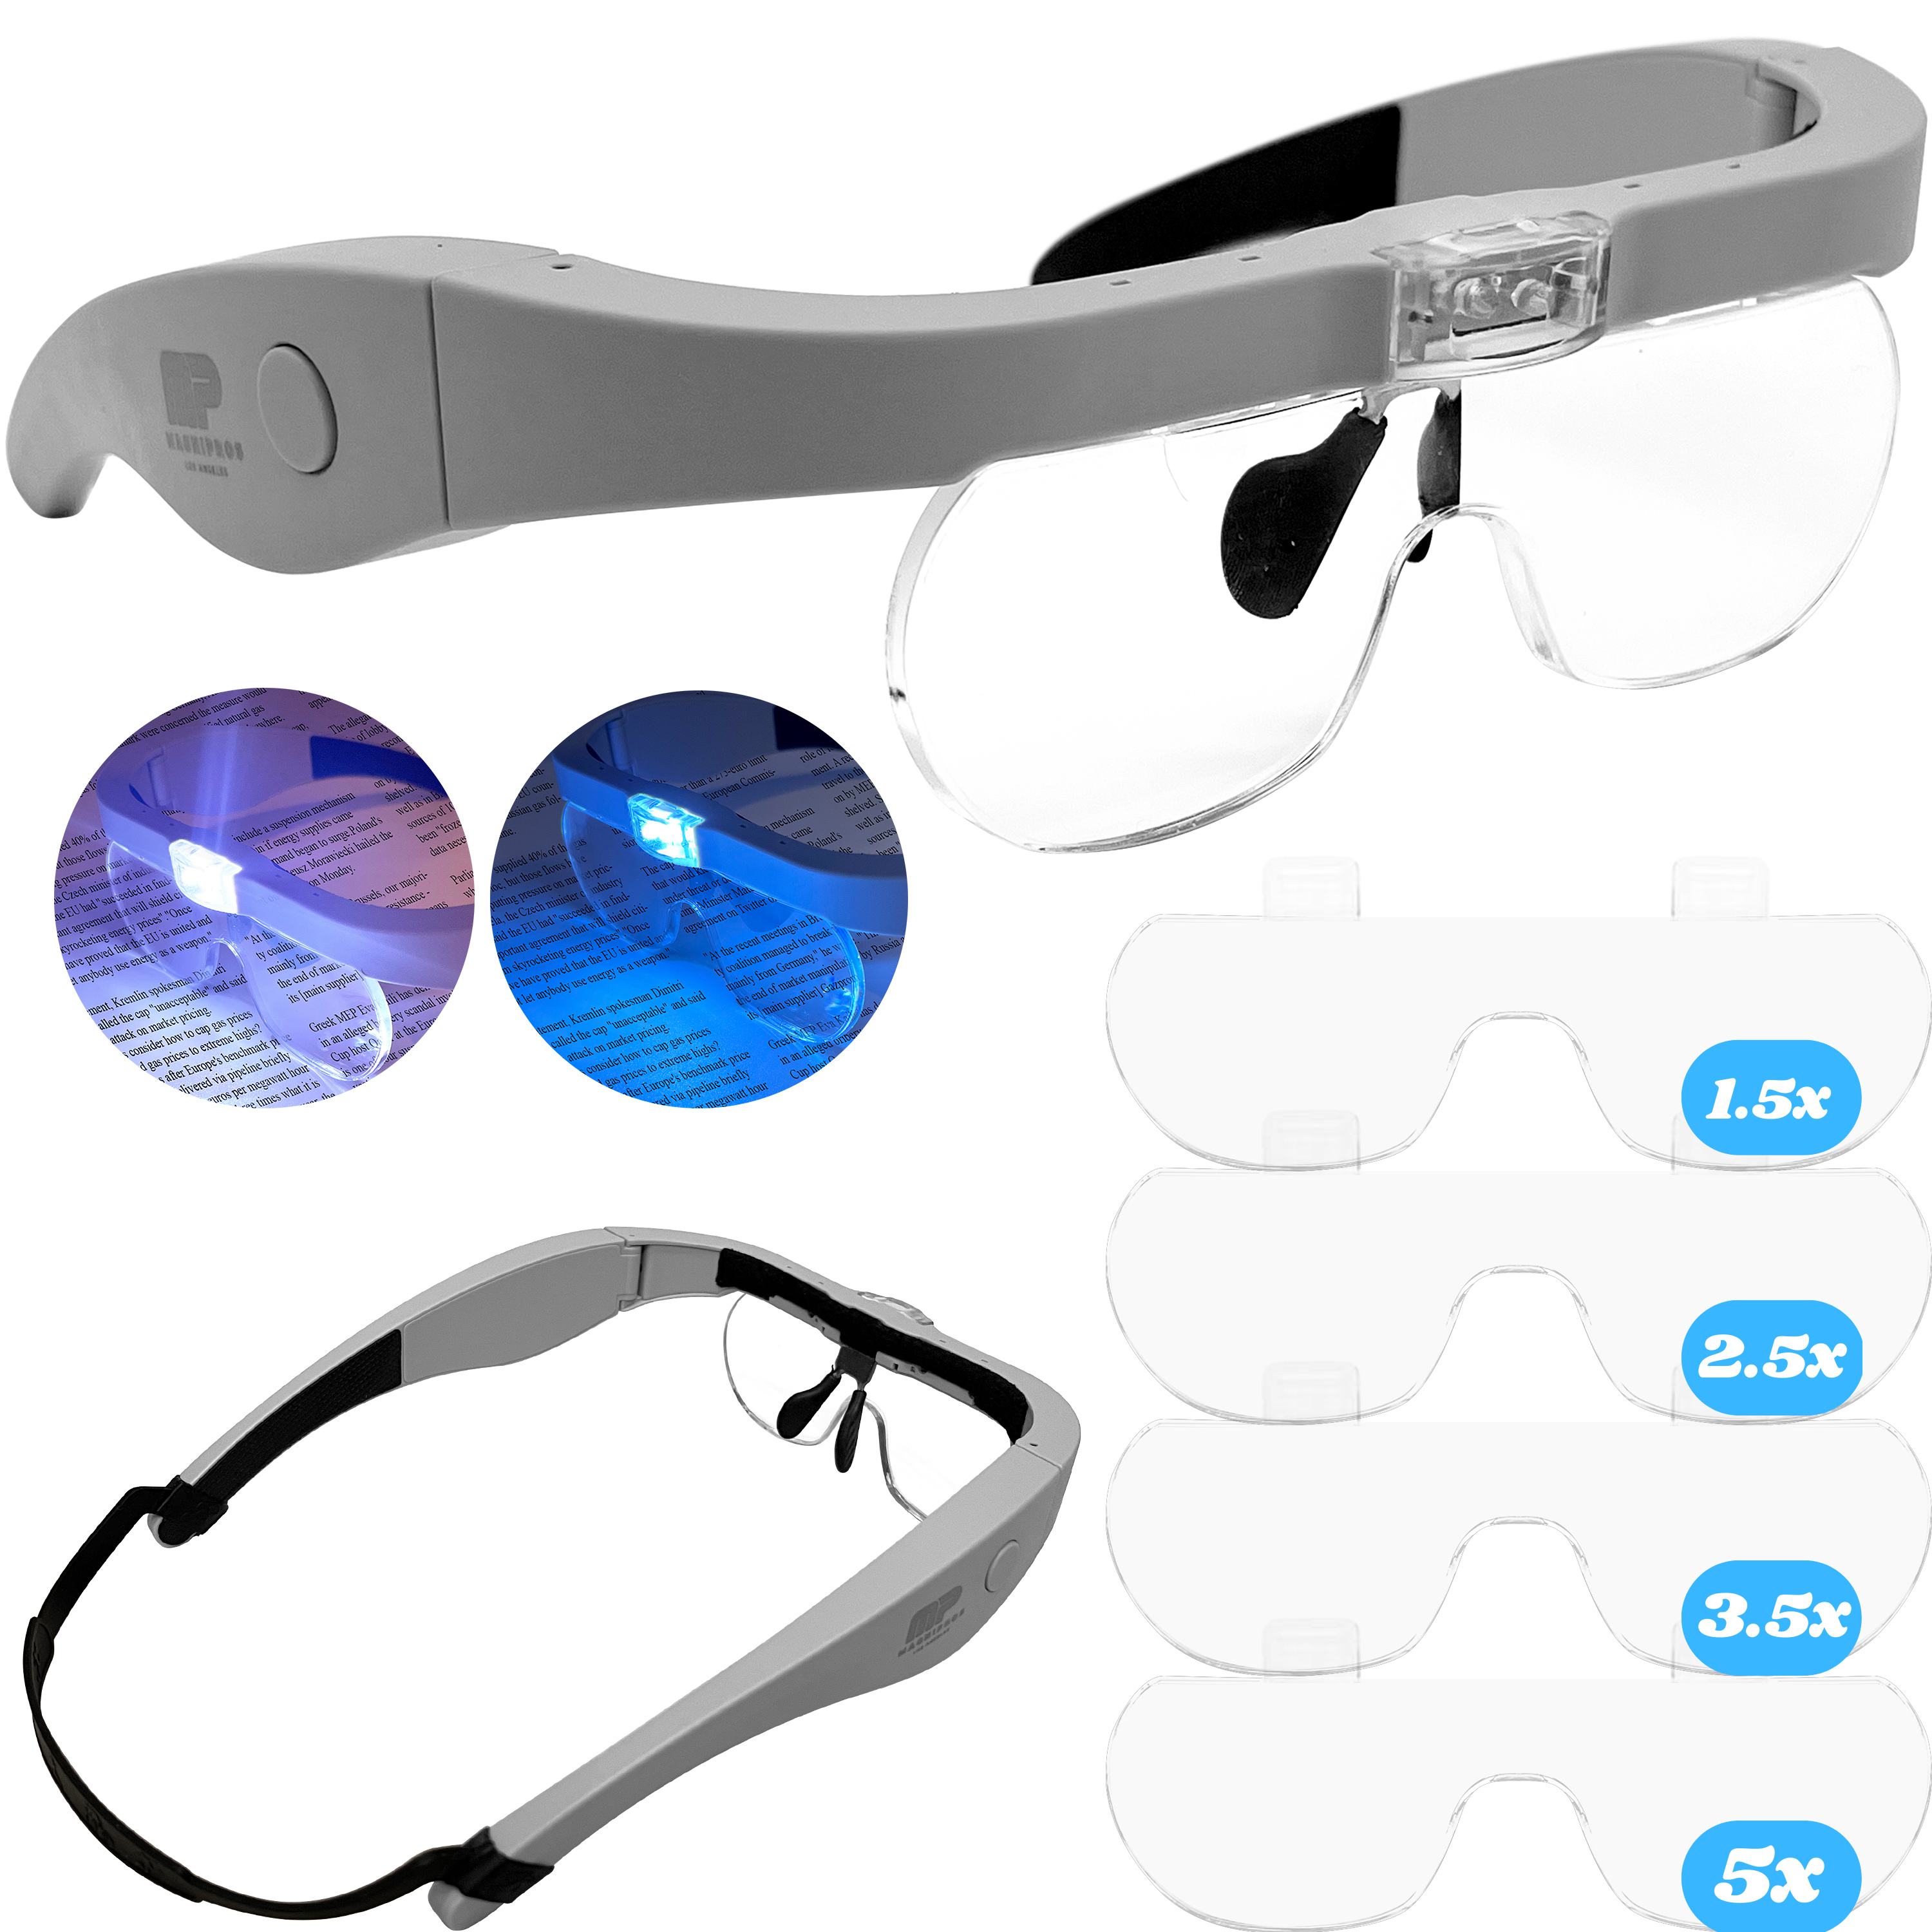 Vision Aid Magnifying Glasses with LED Light, 5 Lenses, Headband, Storage Case | Hands Free Lighted Head Mount Magnifier for Hobby Crafts Macular